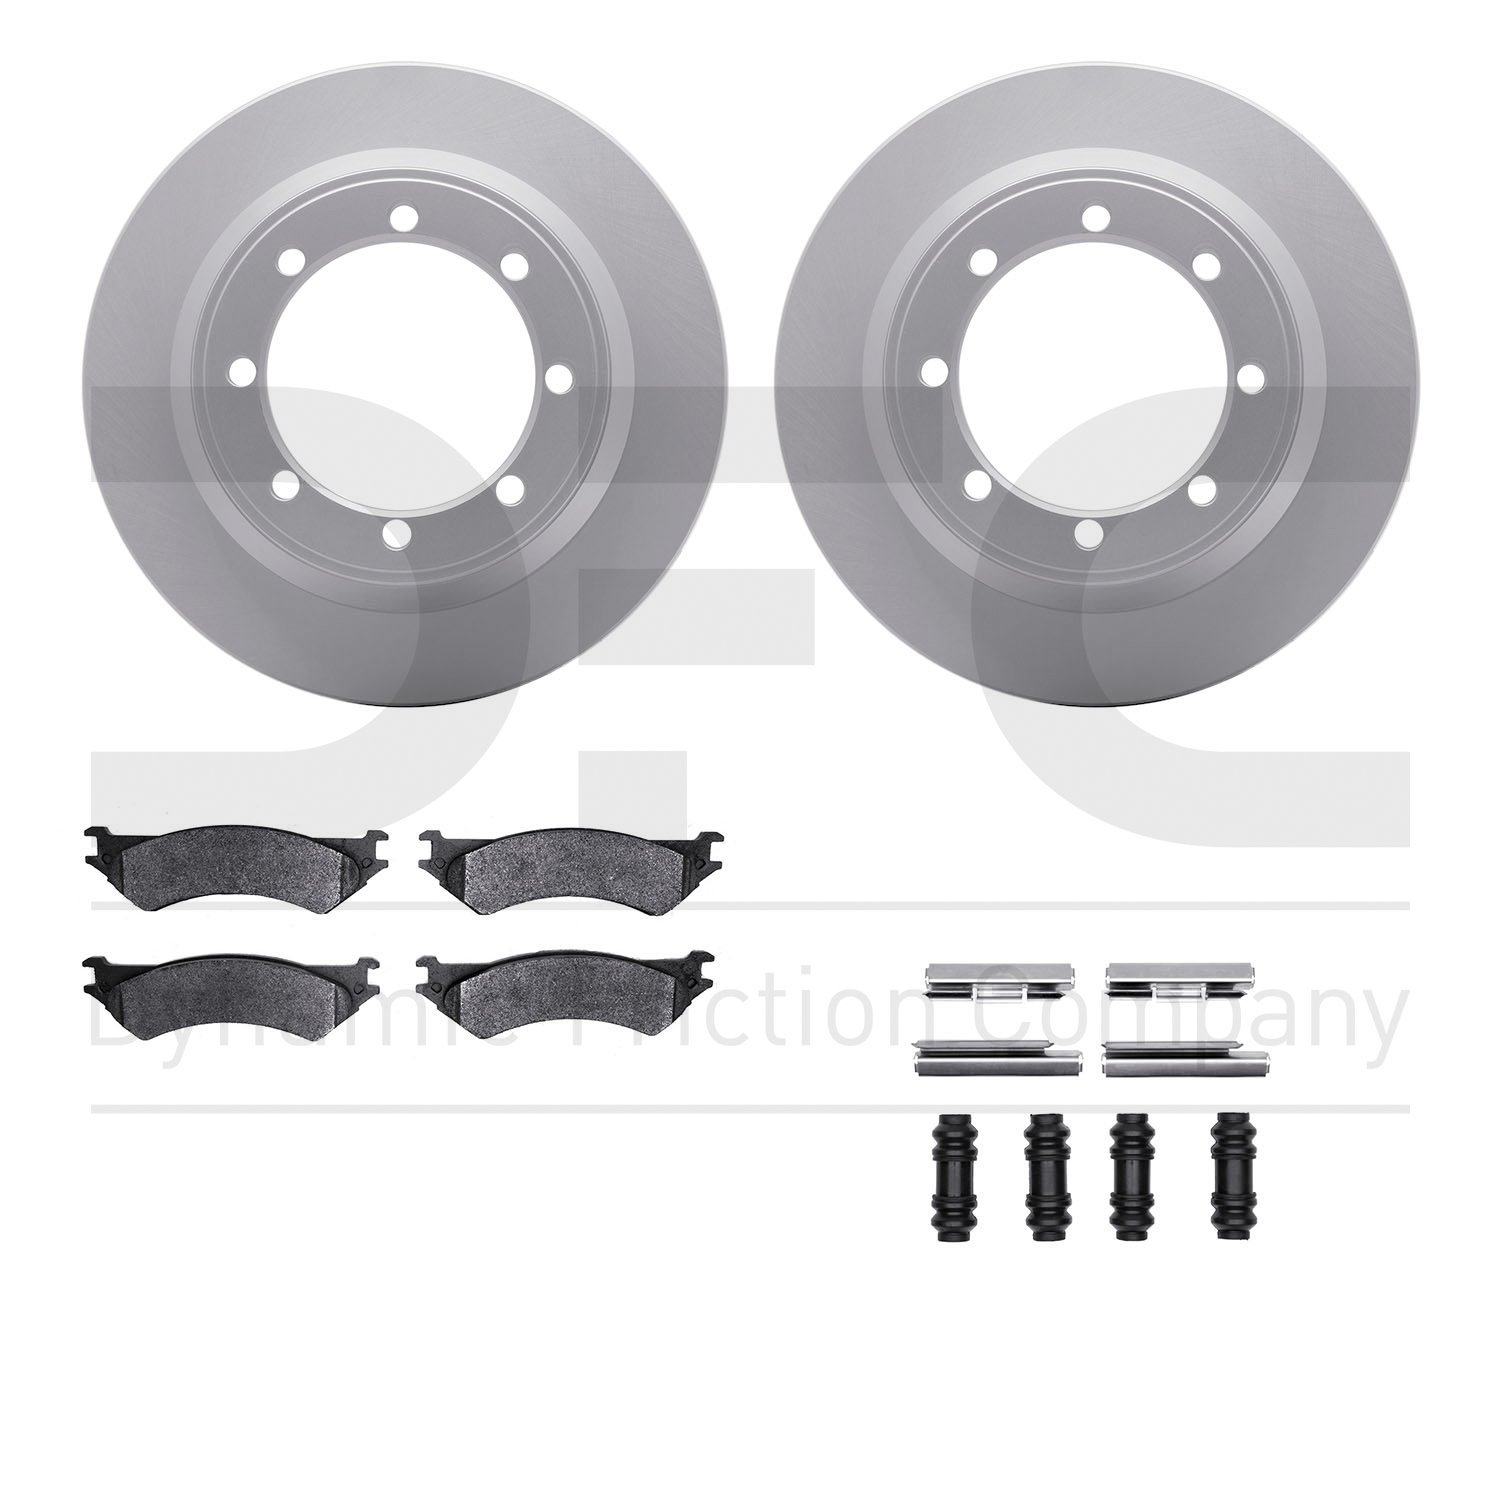 4412-54030 Geospec Brake Rotors with Ultimate-Duty Brake Pads & Hardware, 1999-2007 Ford/Lincoln/Mercury/Mazda, Position: Rear